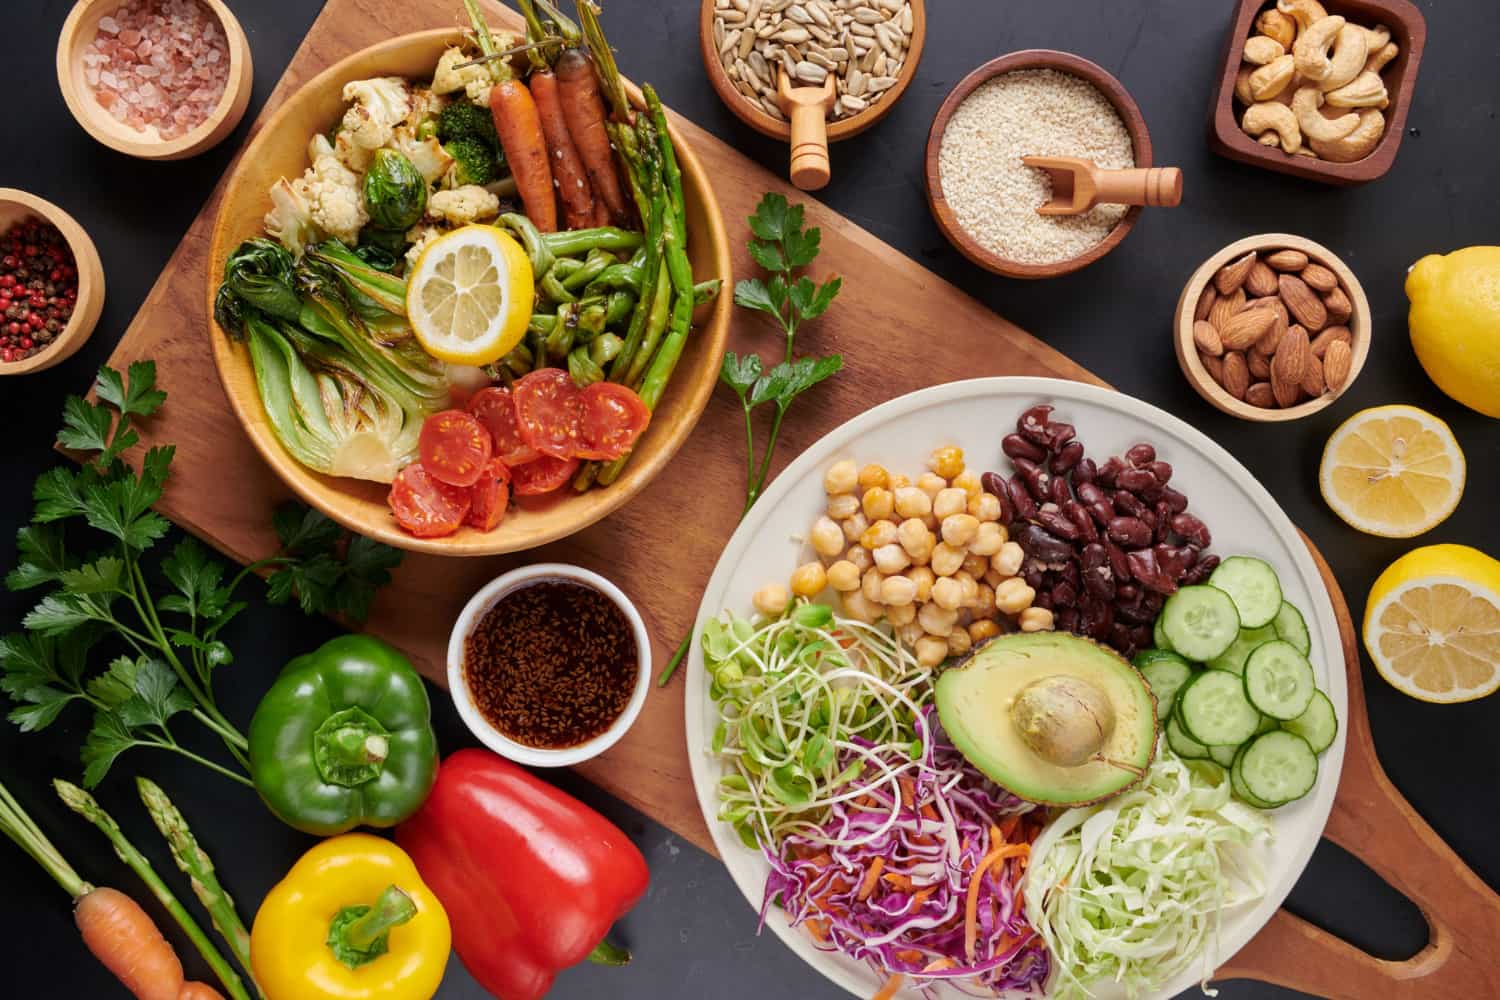 Switching to a vegetarian diet can prevent heart disease and diabetes